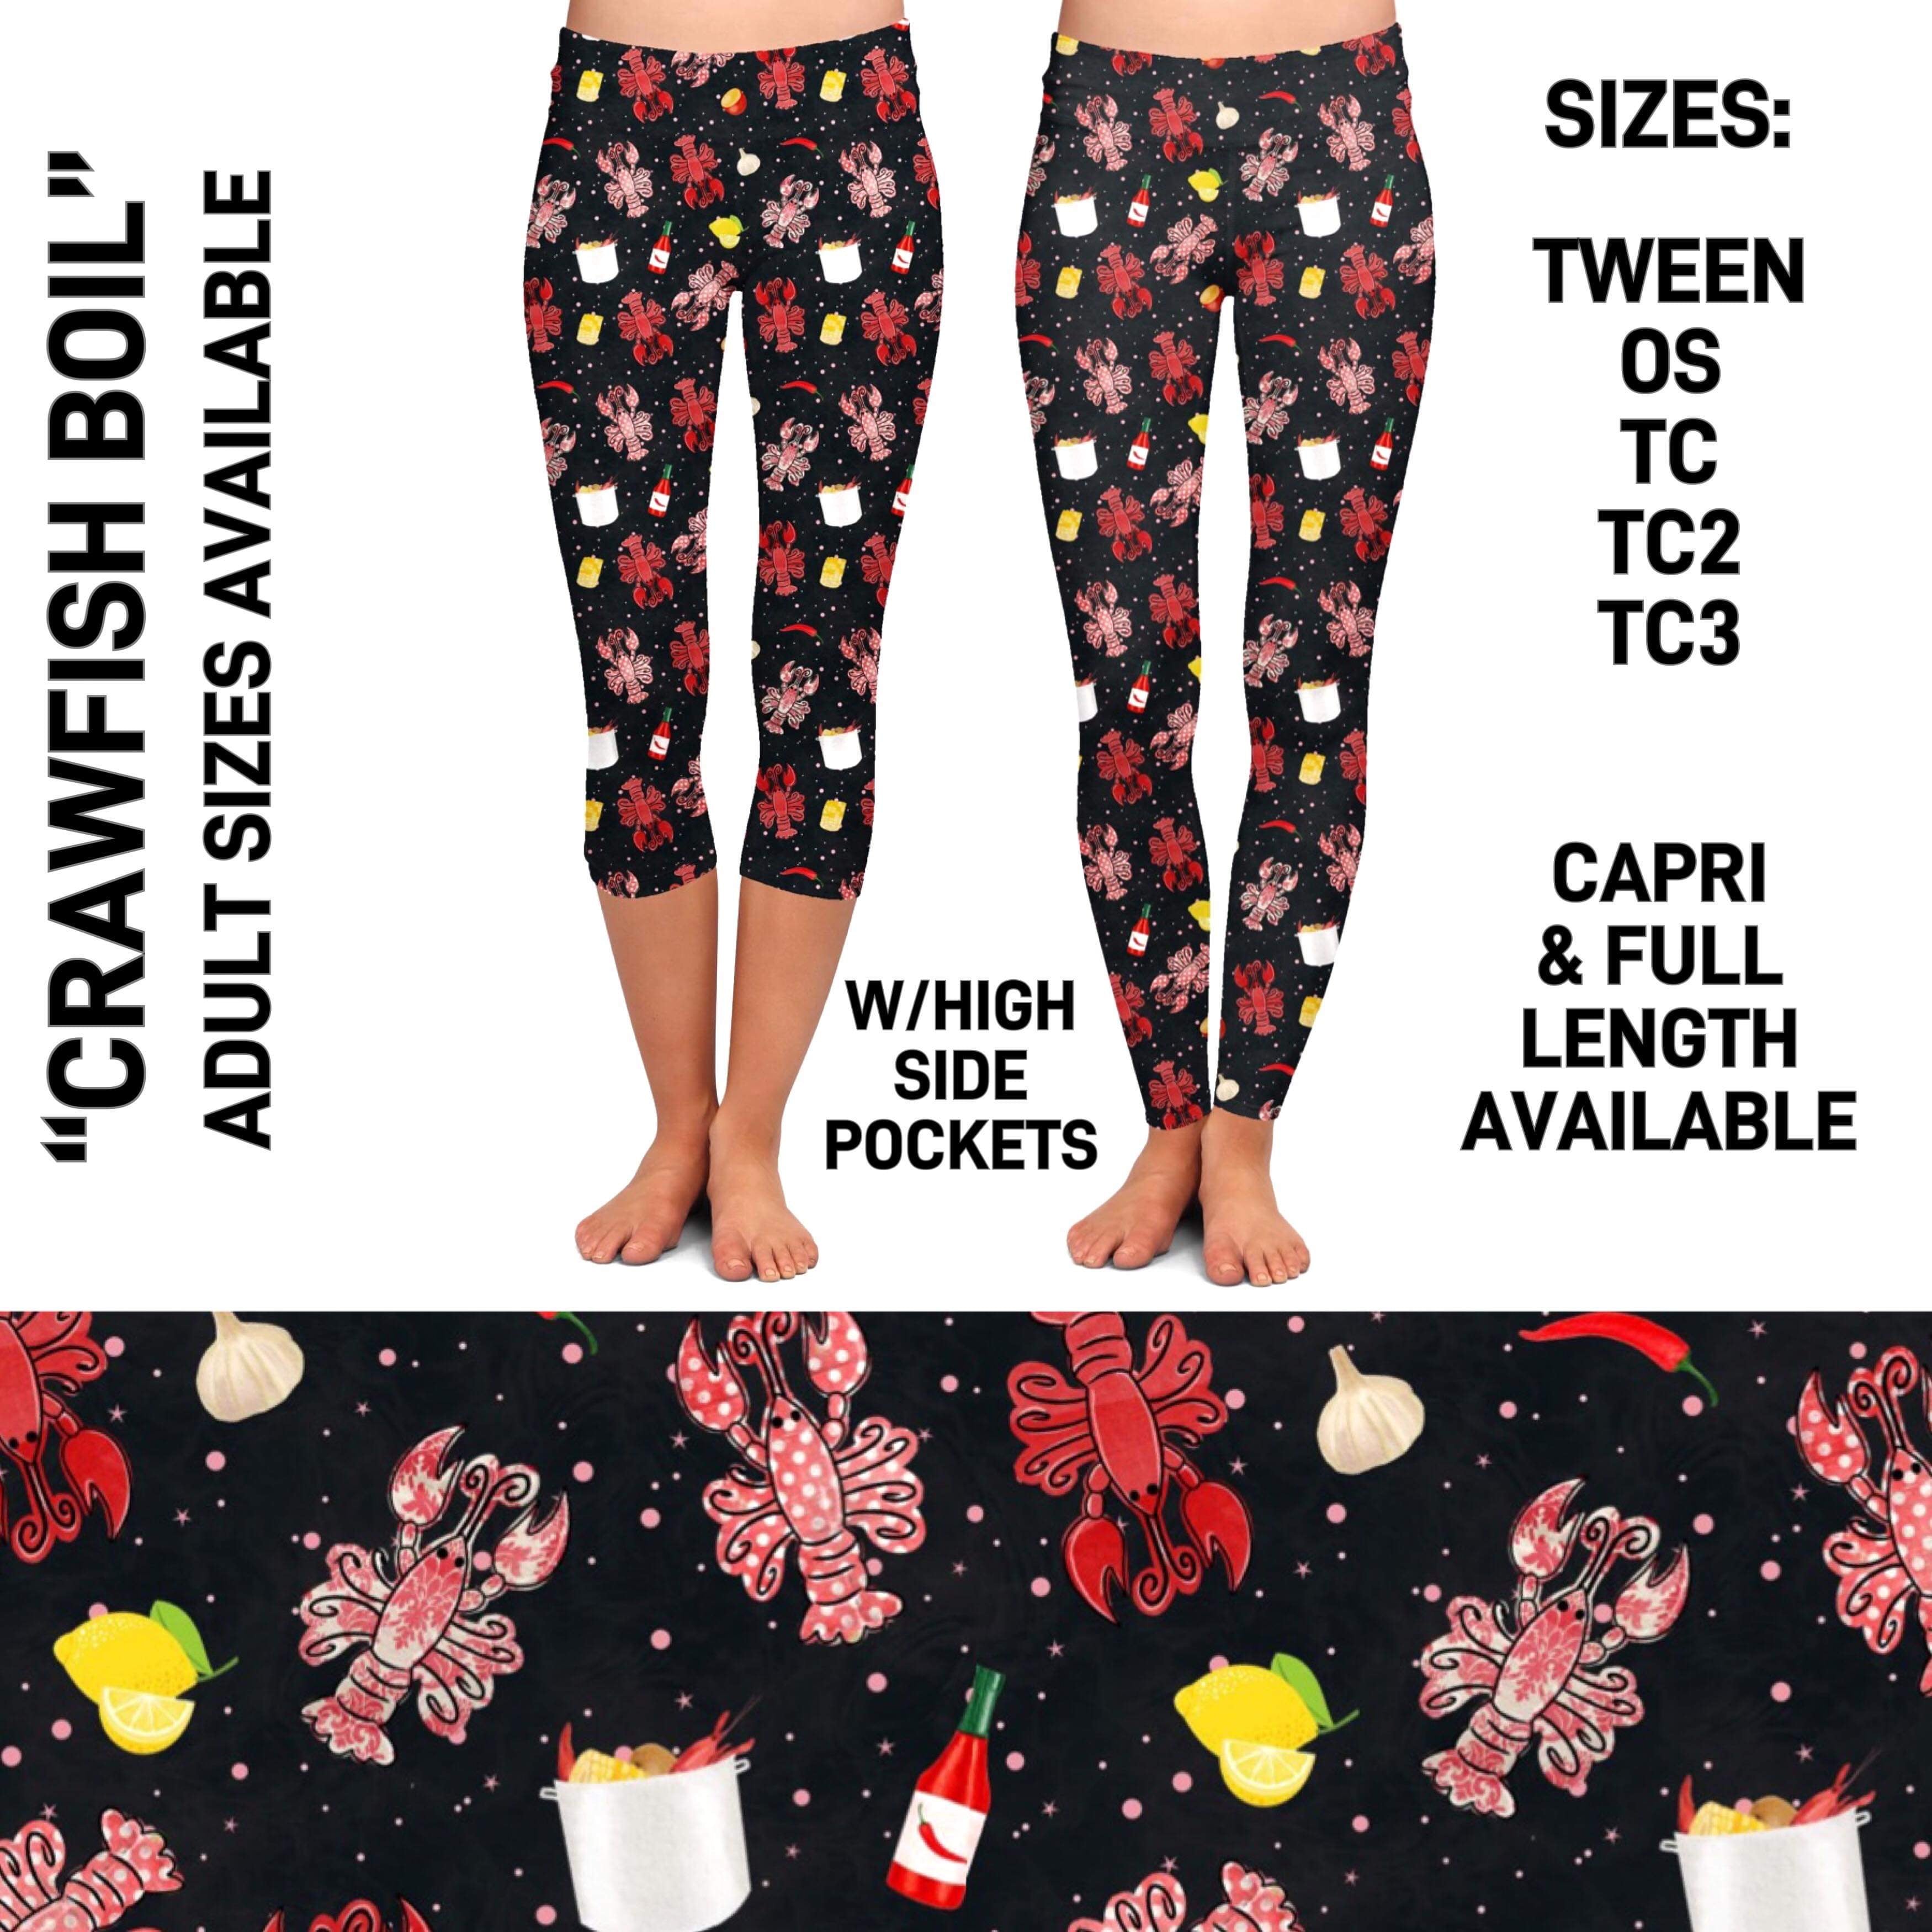 RTS - Crawfish Boil Leggings with High Side Pockets